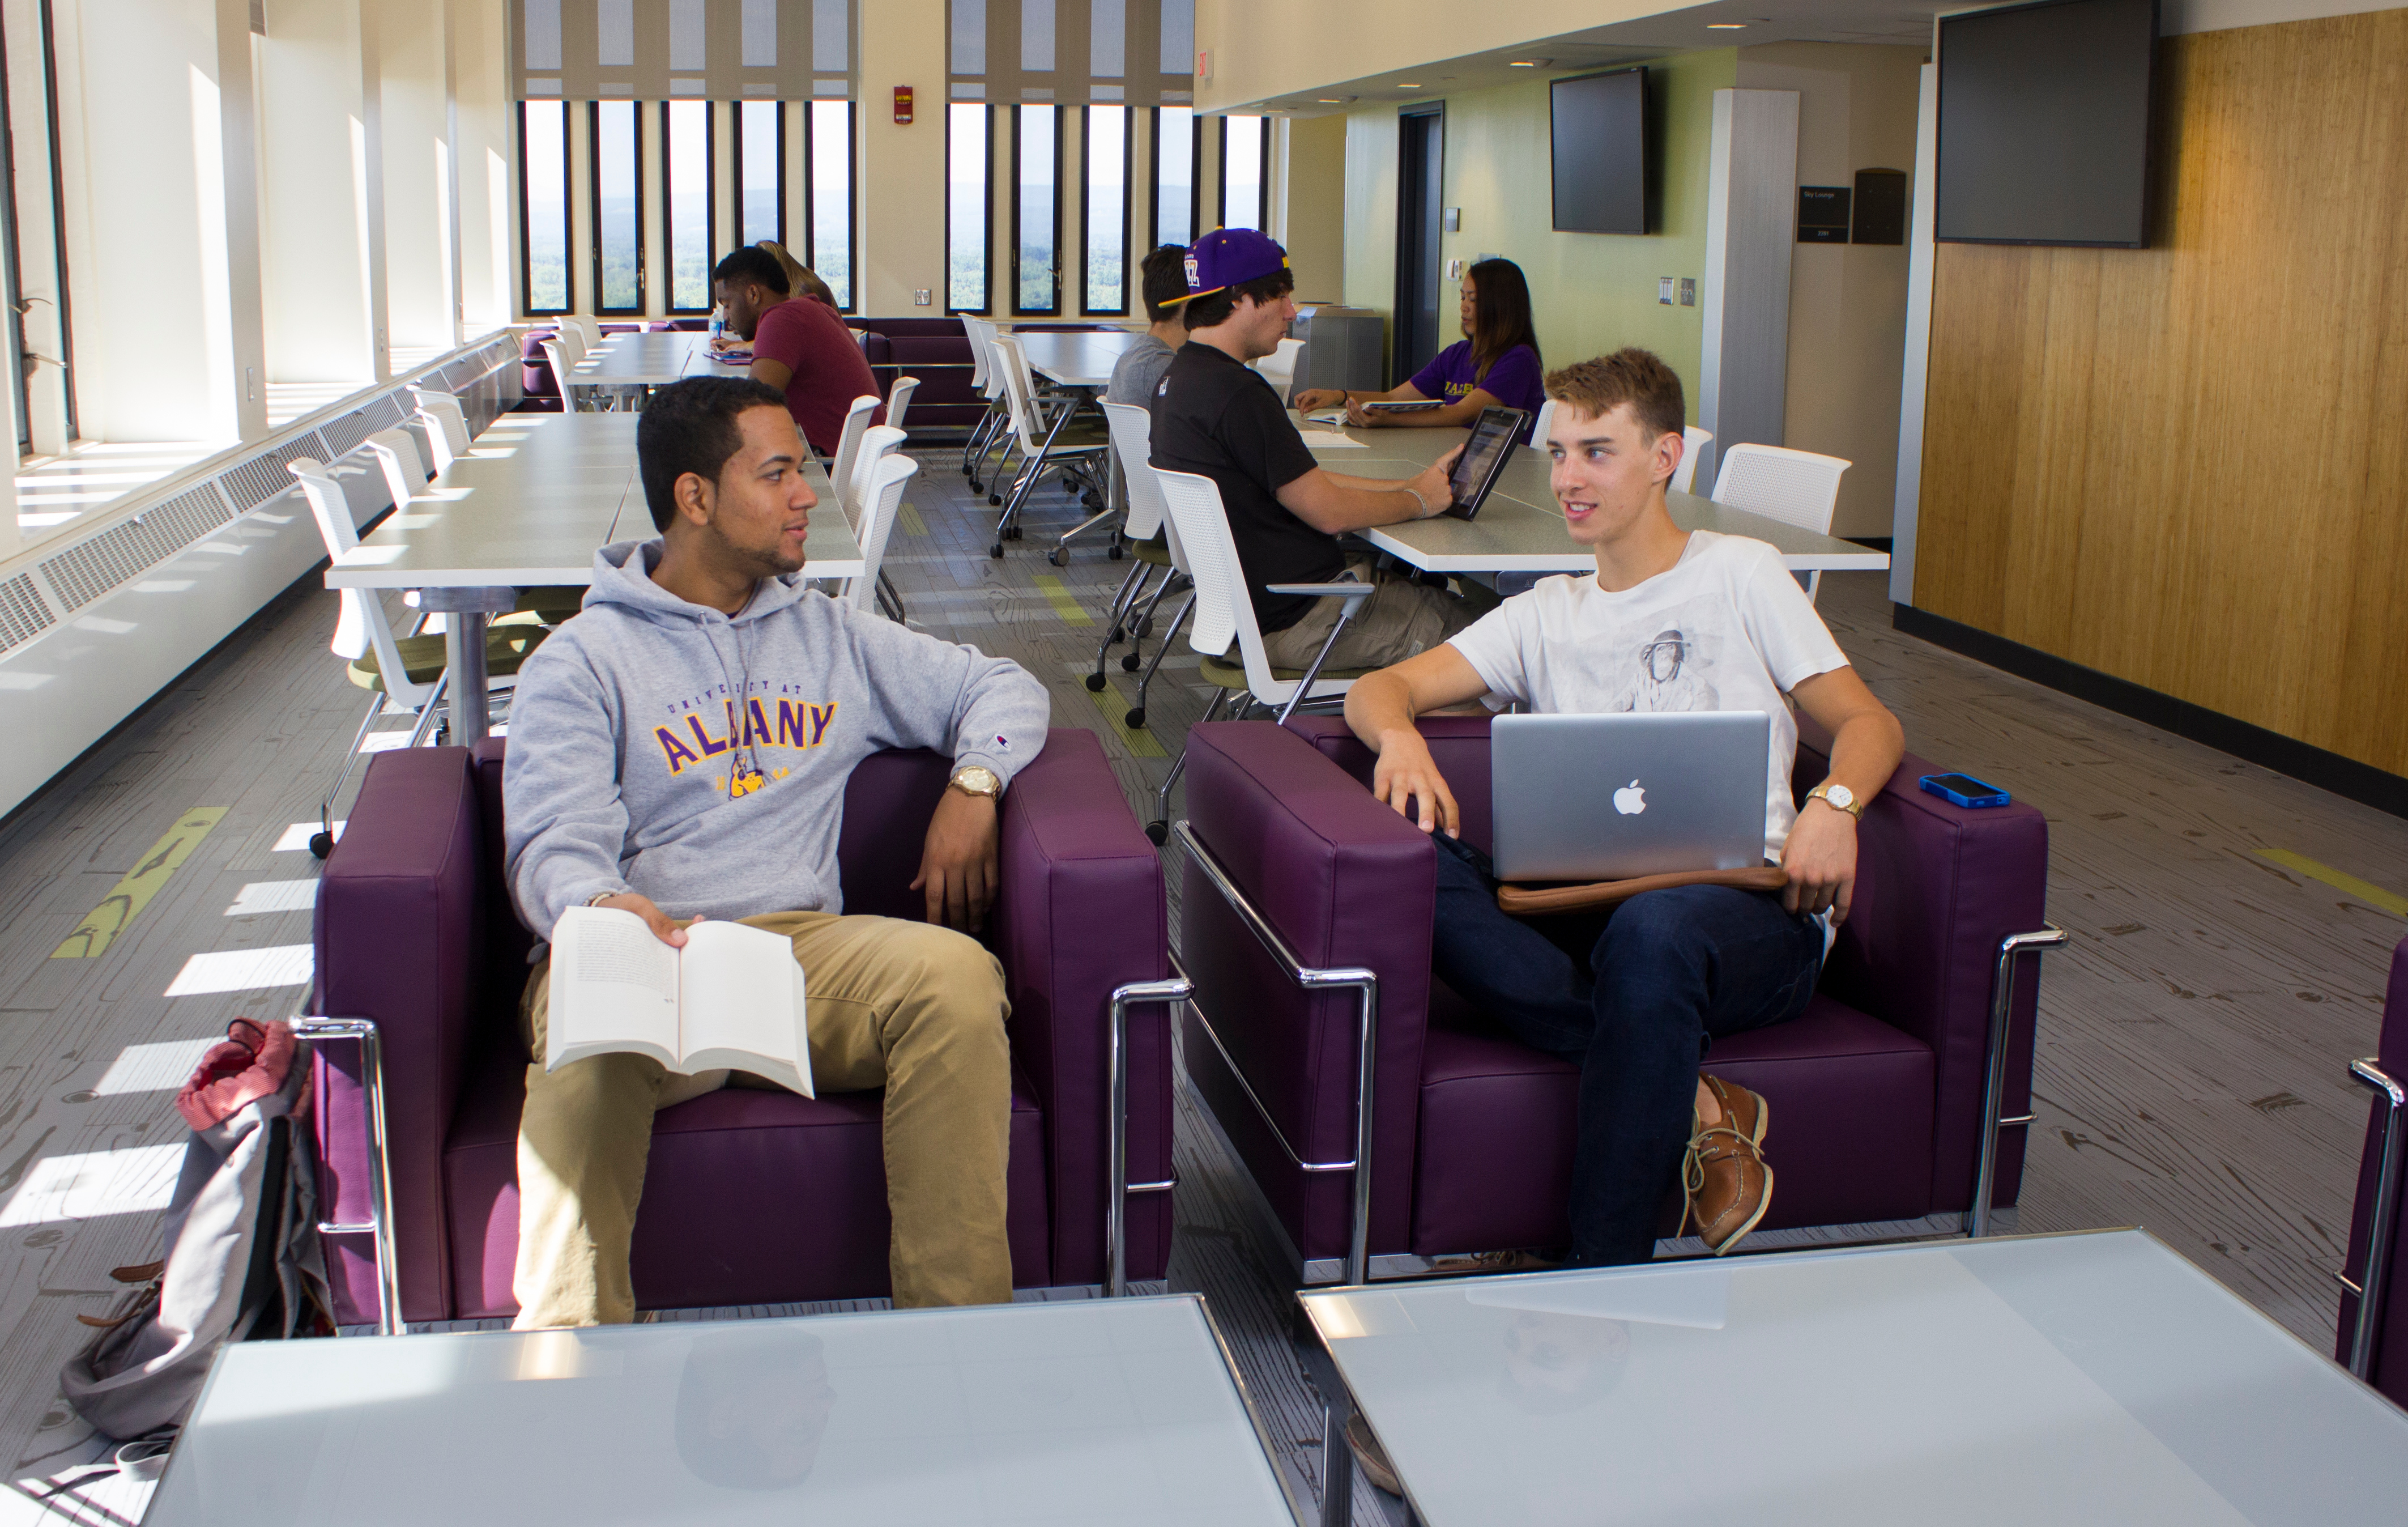 Seven students work inside the Indigenous Quad Penthouse's study lounge, which has purple chairs, long tables and large windows